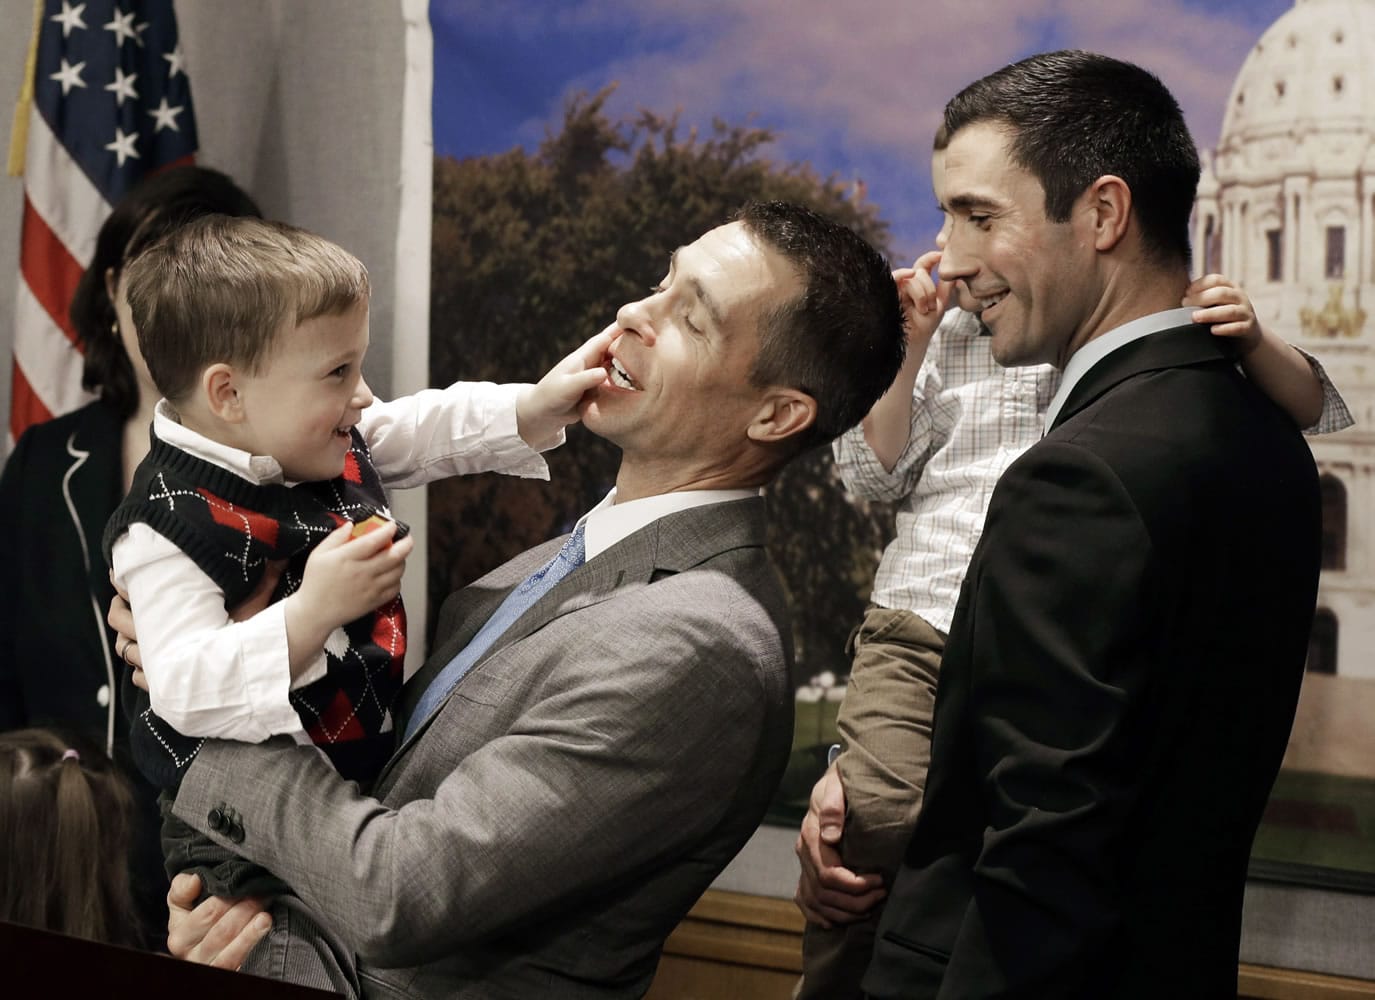 Dr. Paul Melchert, left, gets interrupted by son, Emmett, as he attempts to address the media while his partner, James Zimerman, right, holds twin Gabriel during a news conference in St.